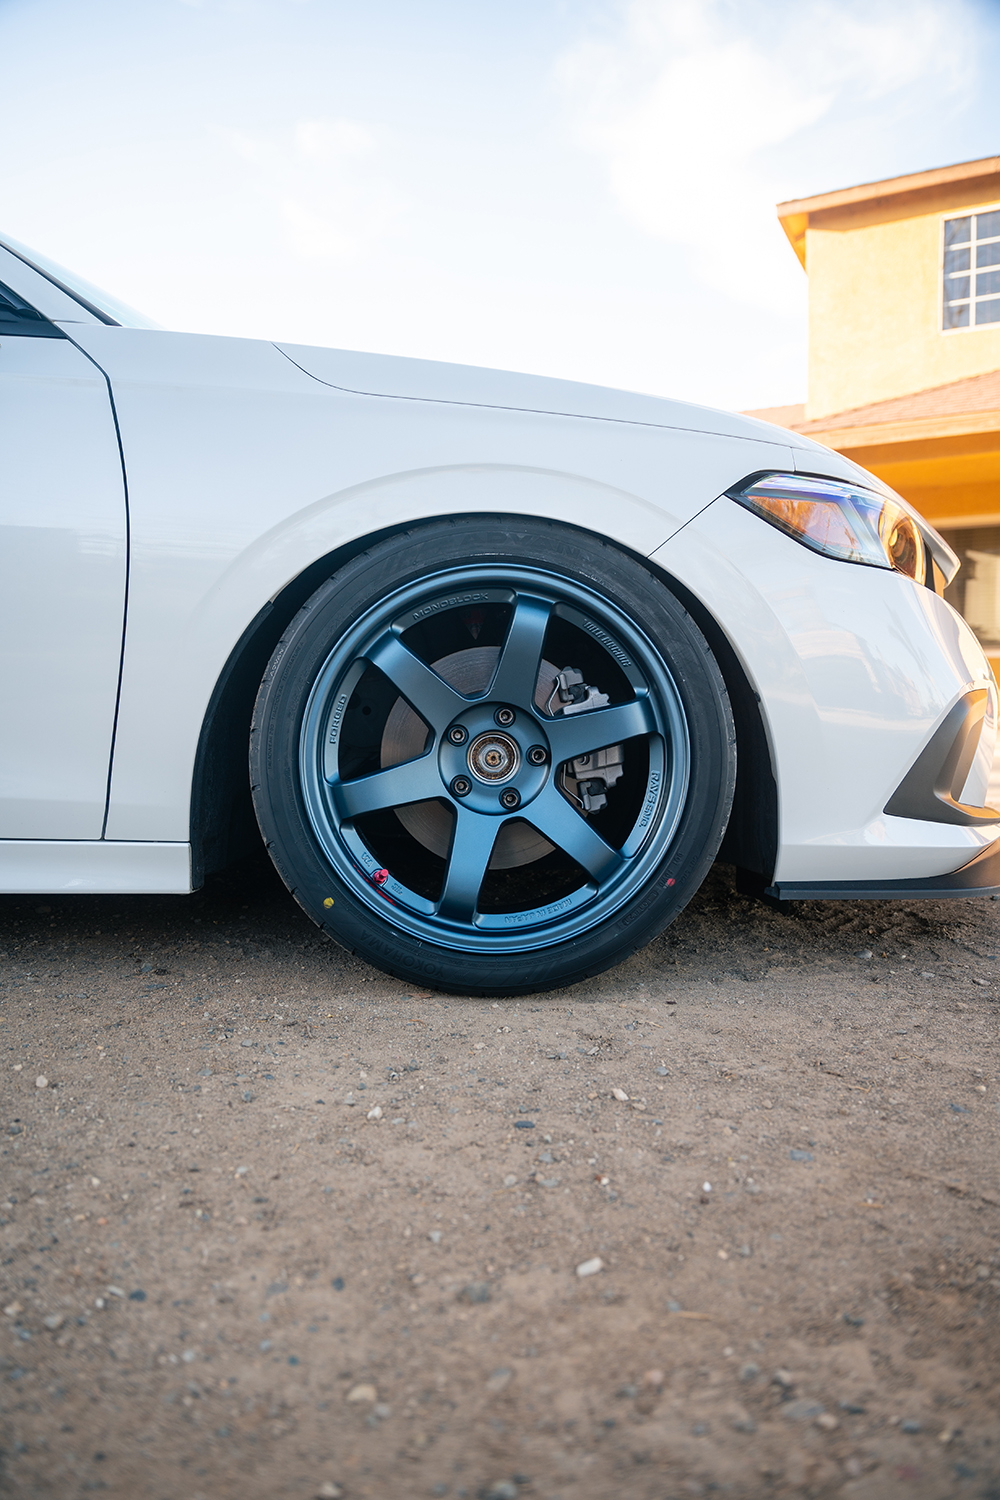 11th Gen Honda Civic 22 civic si on some new shoes and SPICY fitment A7404135